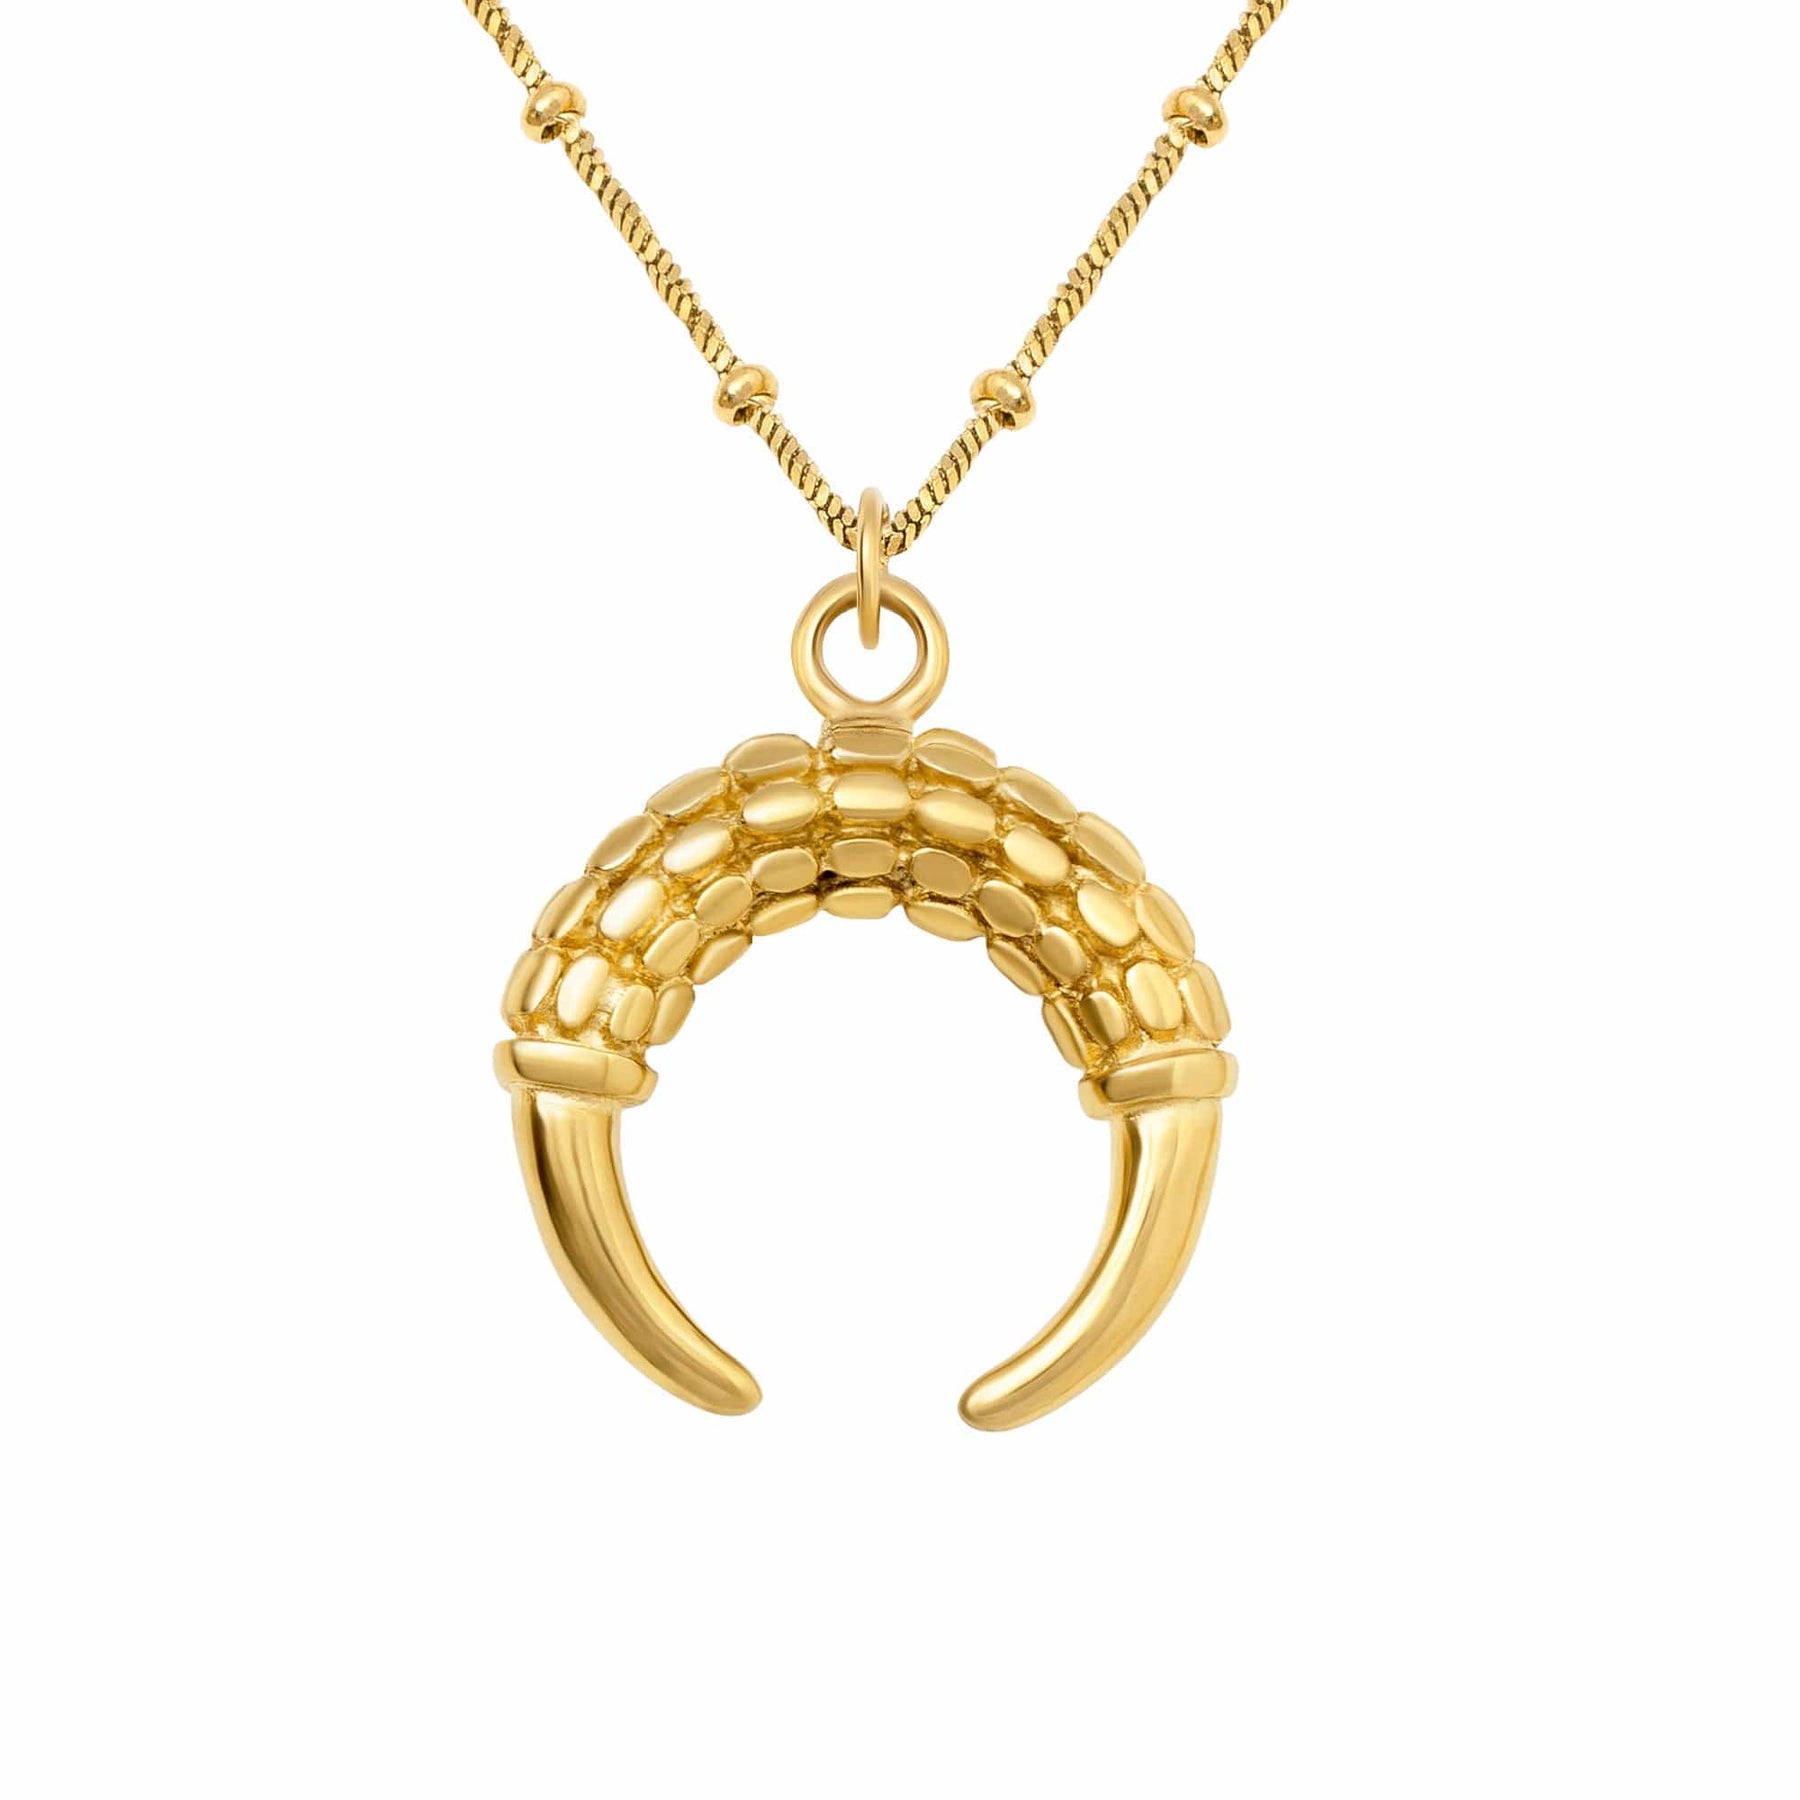 BohoMoon Stainless Steel Leia Horn Necklace Gold